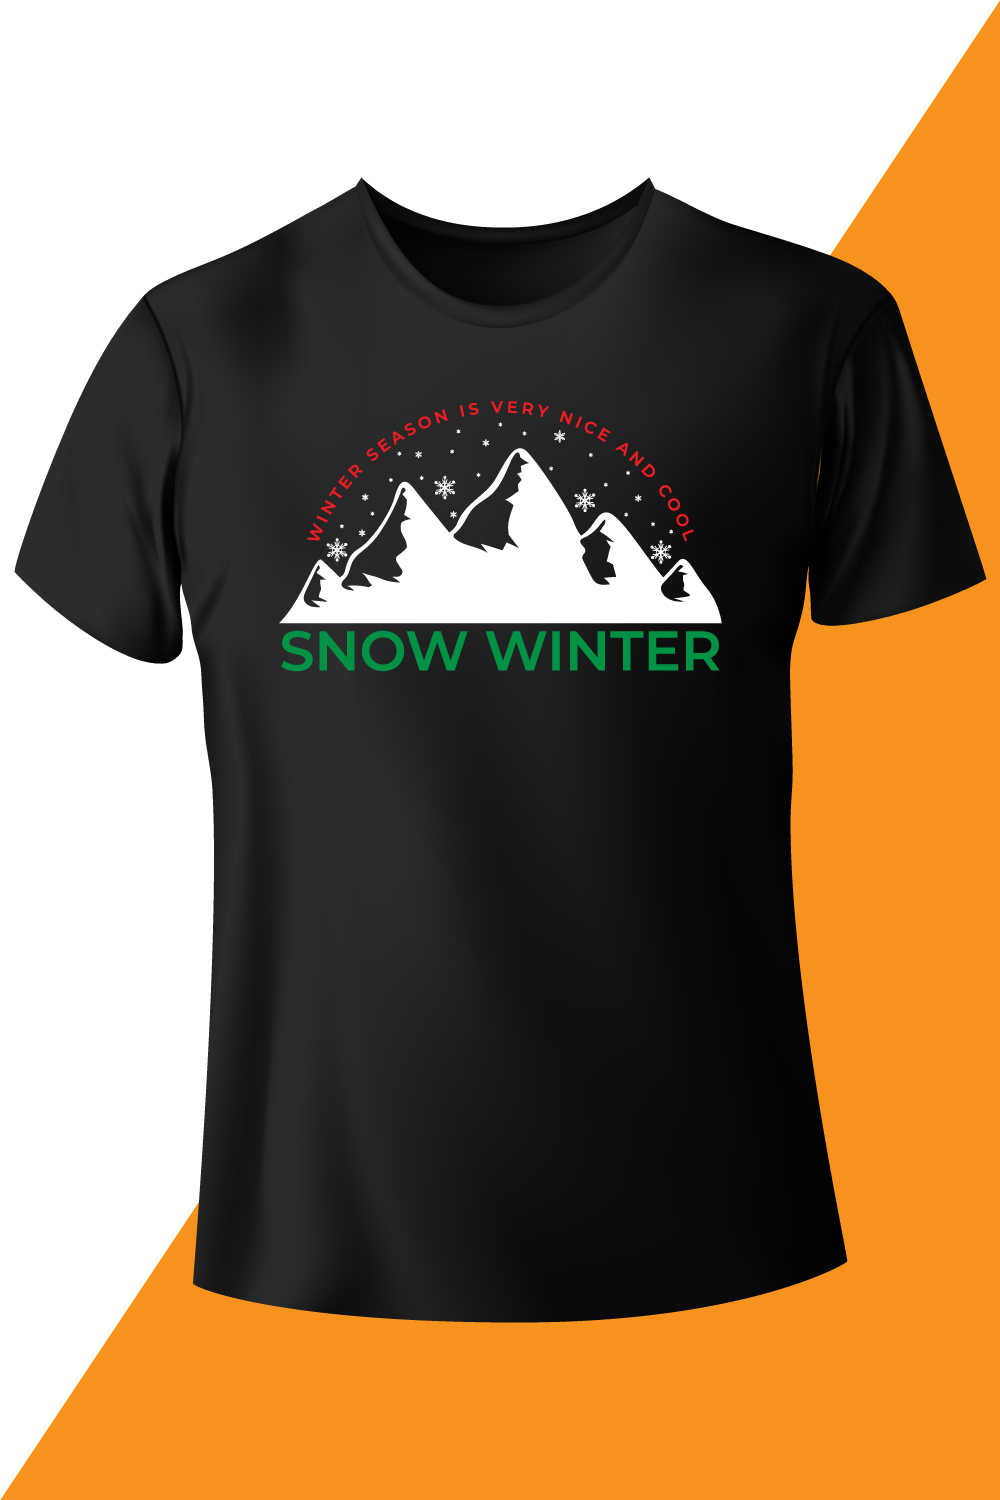 Image of a black t-shirt with wonderful snowy mountains print.